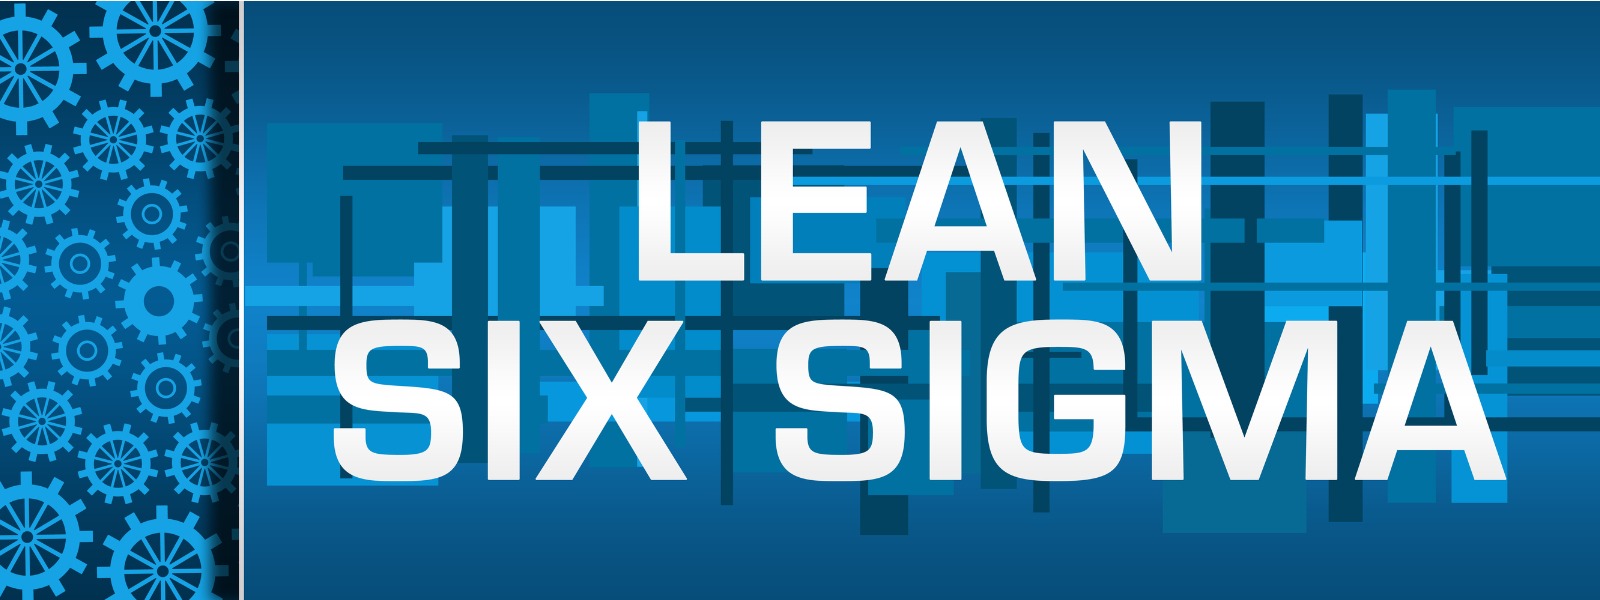 Lean Six Sigma printed over background graphic with gears.